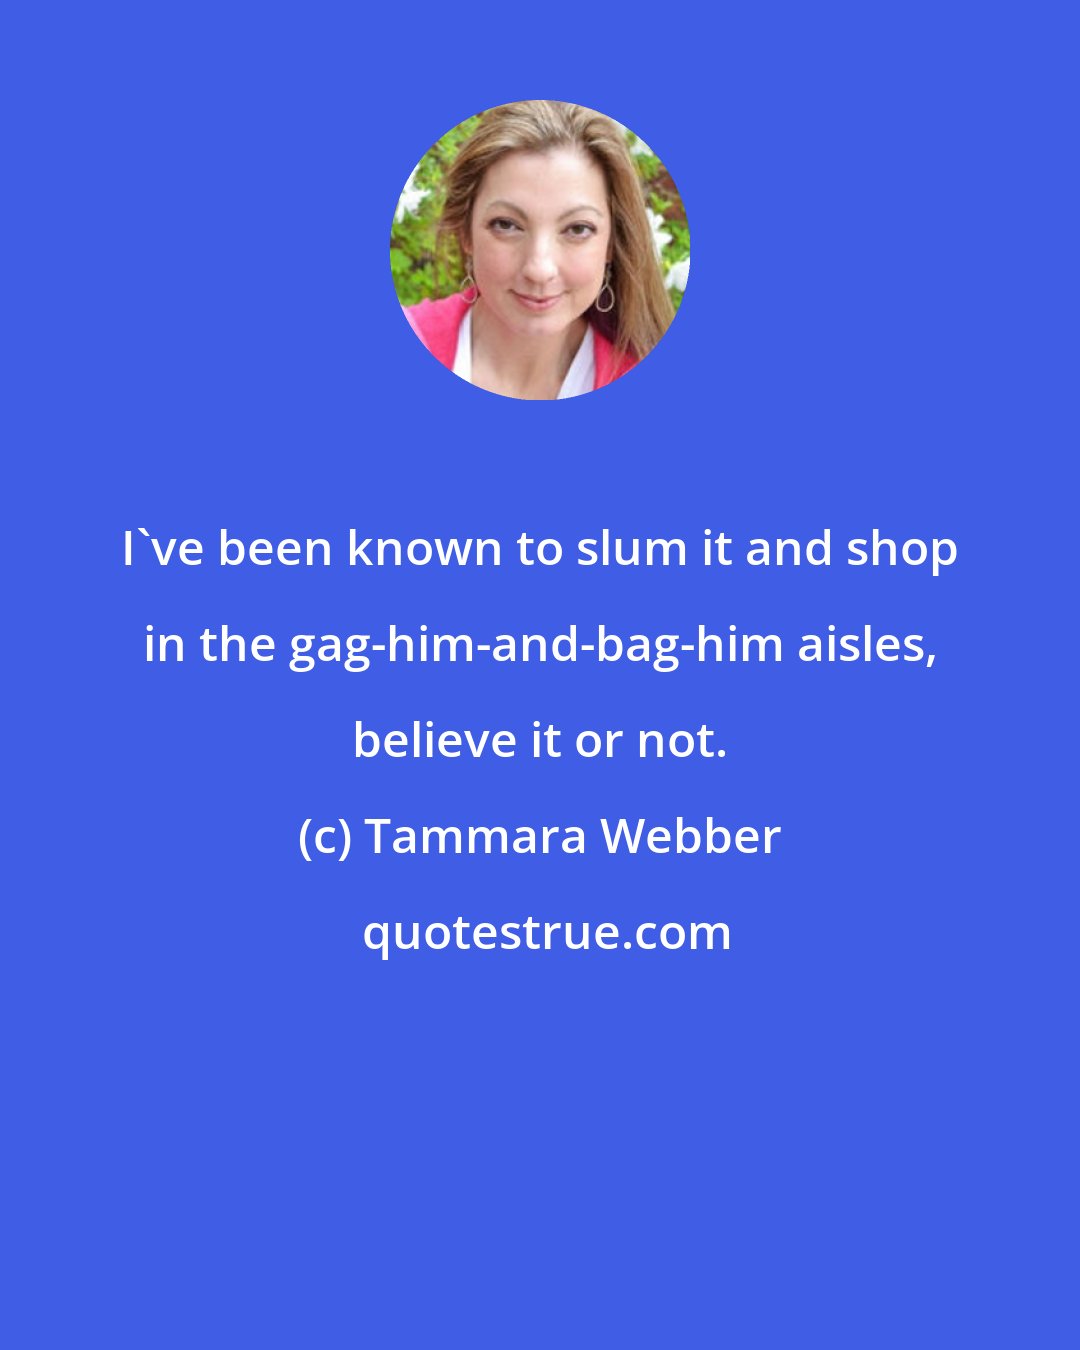 Tammara Webber: I've been known to slum it and shop in the gag-him-and-bag-him aisles, believe it or not.